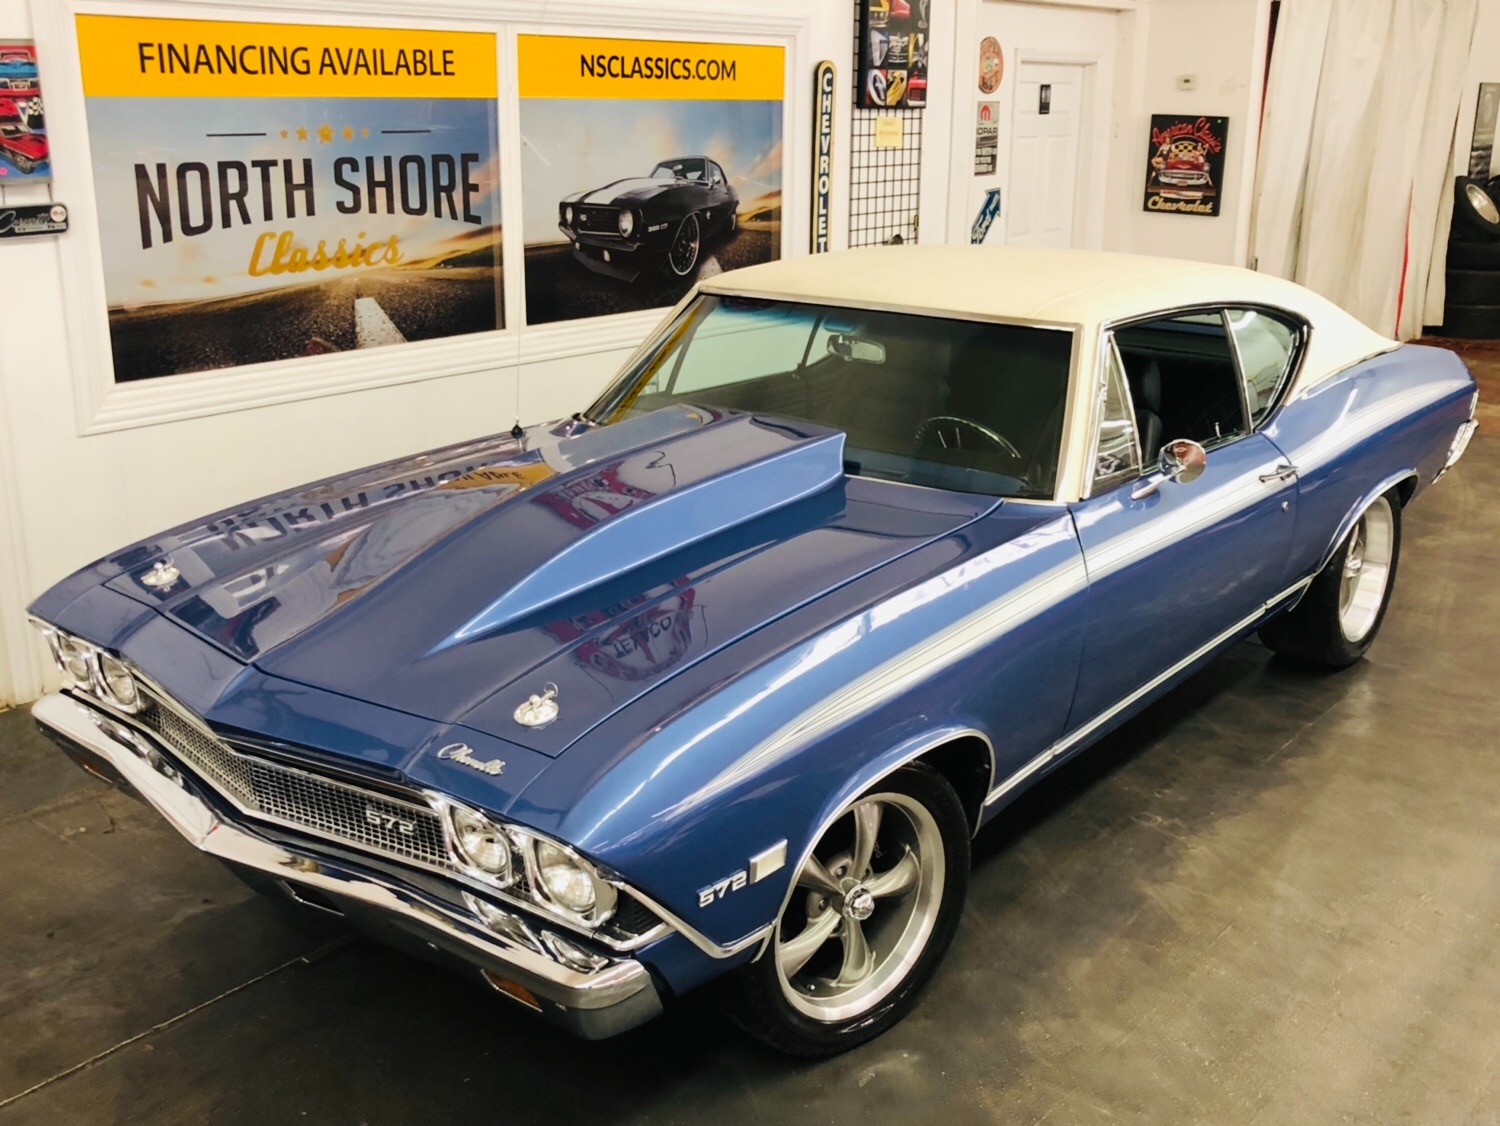 Used 1968 Chevrolet Chevelle -572 FUEL INJECTED STREET BEAST-PRO TOURING - SEE VIDEO - | Mundelein, IL